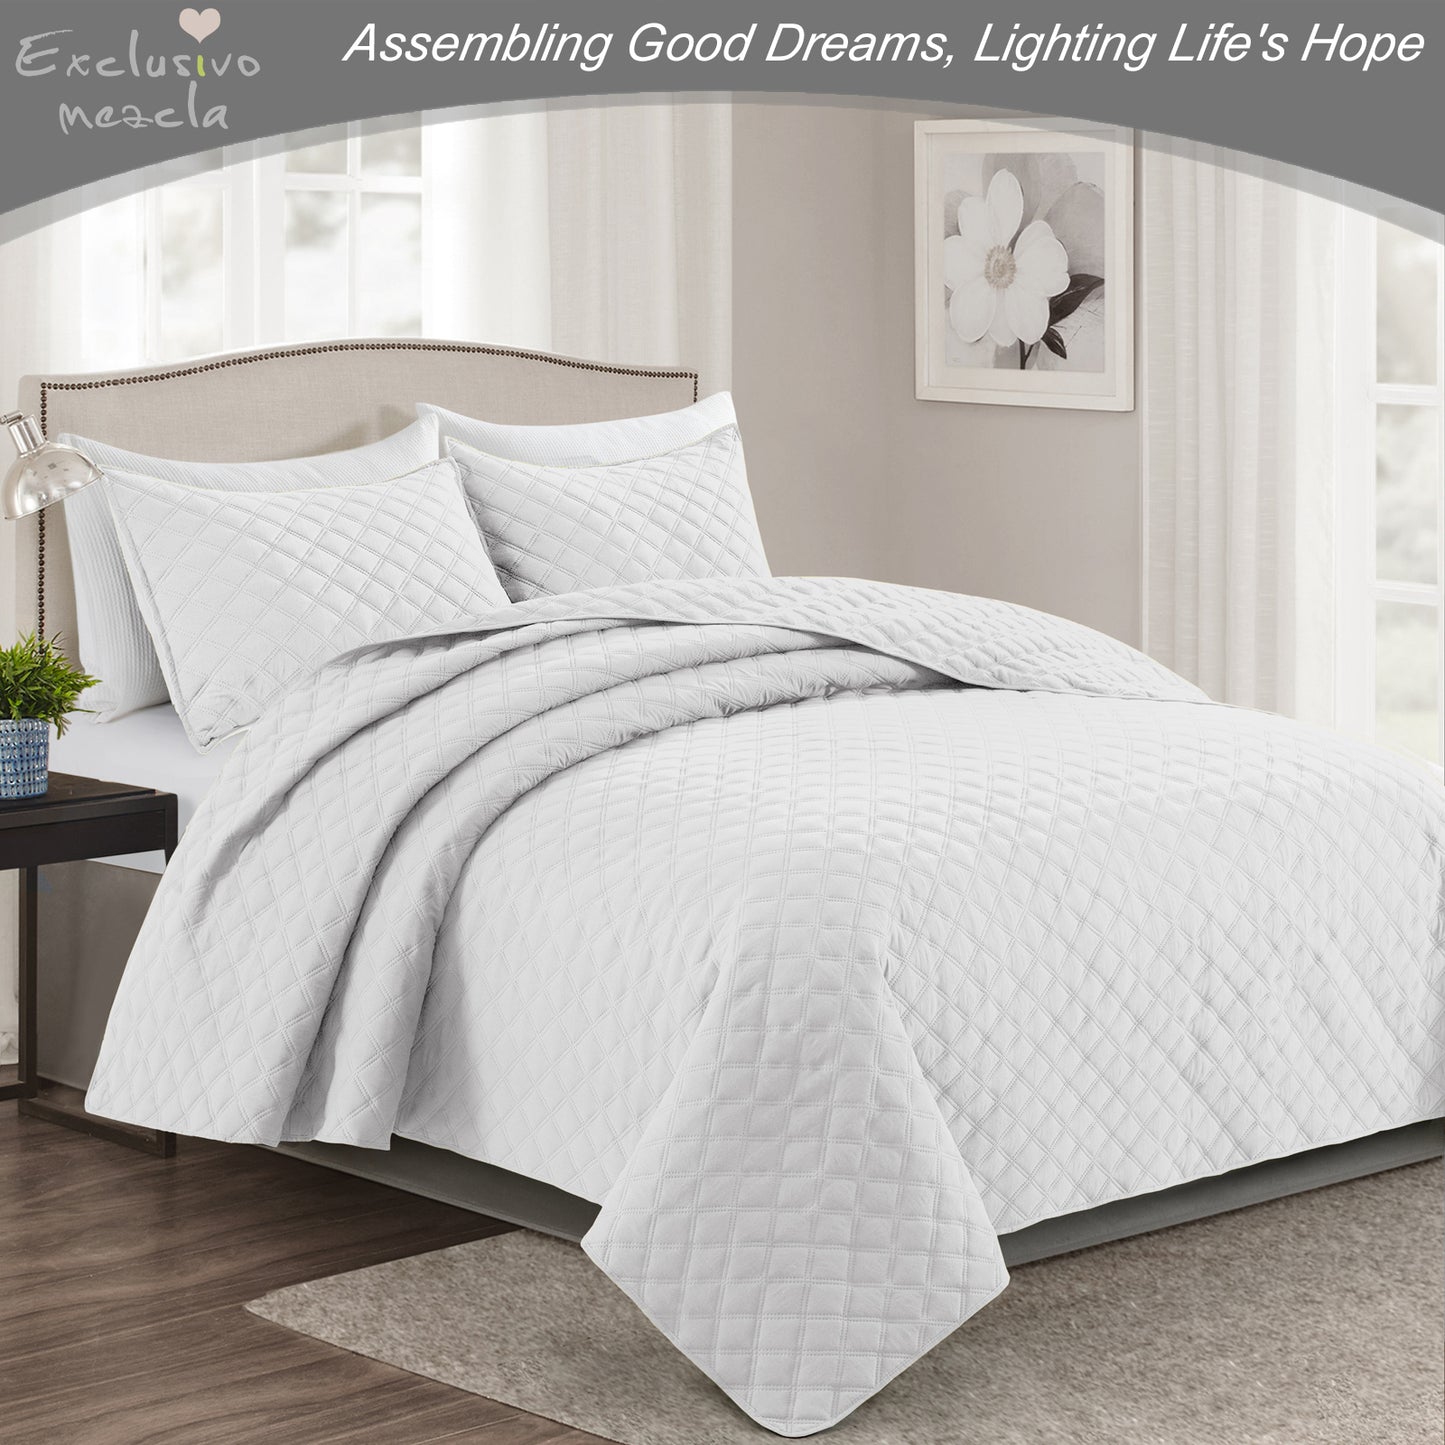 Exclusivo Mezcla 2-Piece White Twin Size Quilt Set, Box Pattern Ultrasonic Lightweight and Soft Quilts/Bedspreads/Coverlets/Bedding Set (1 Quilt, 1 Pillow Sham) for All Seasons